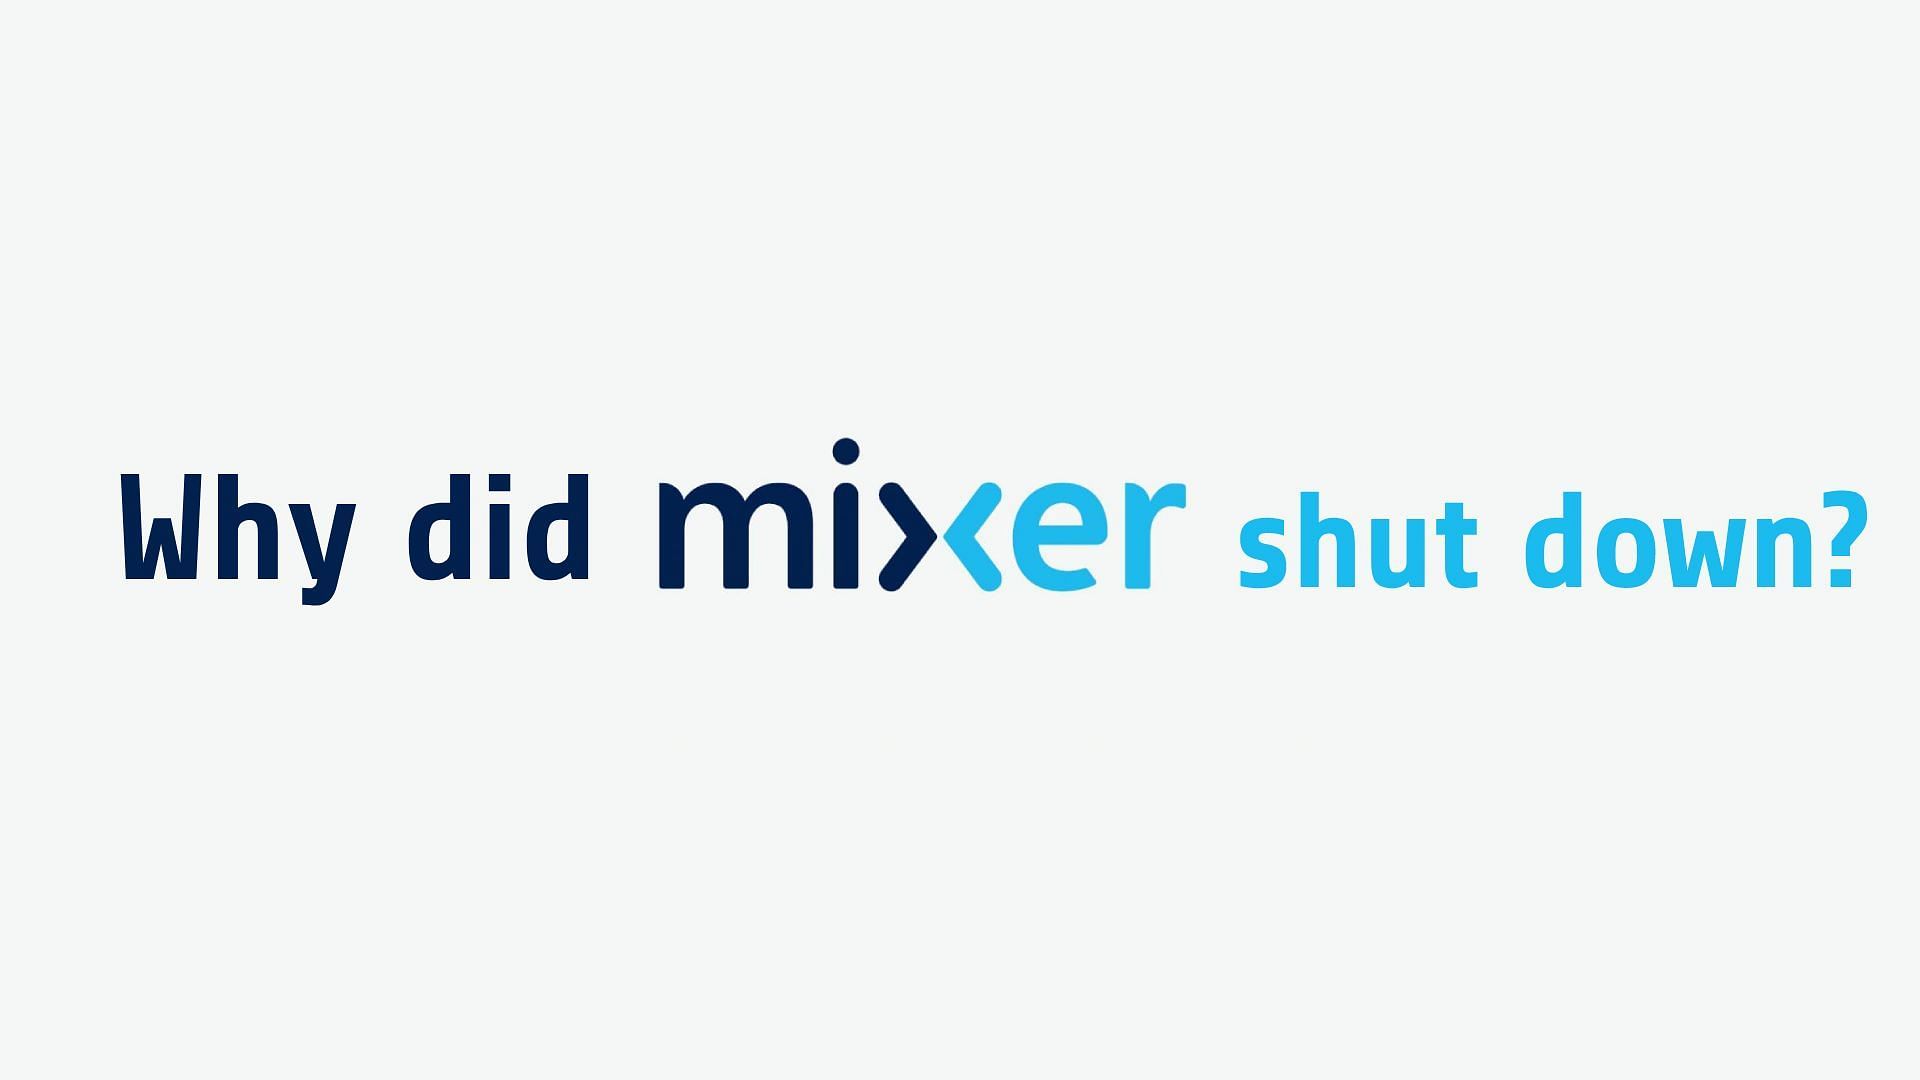 Mixer shut down back in 2020. Why?